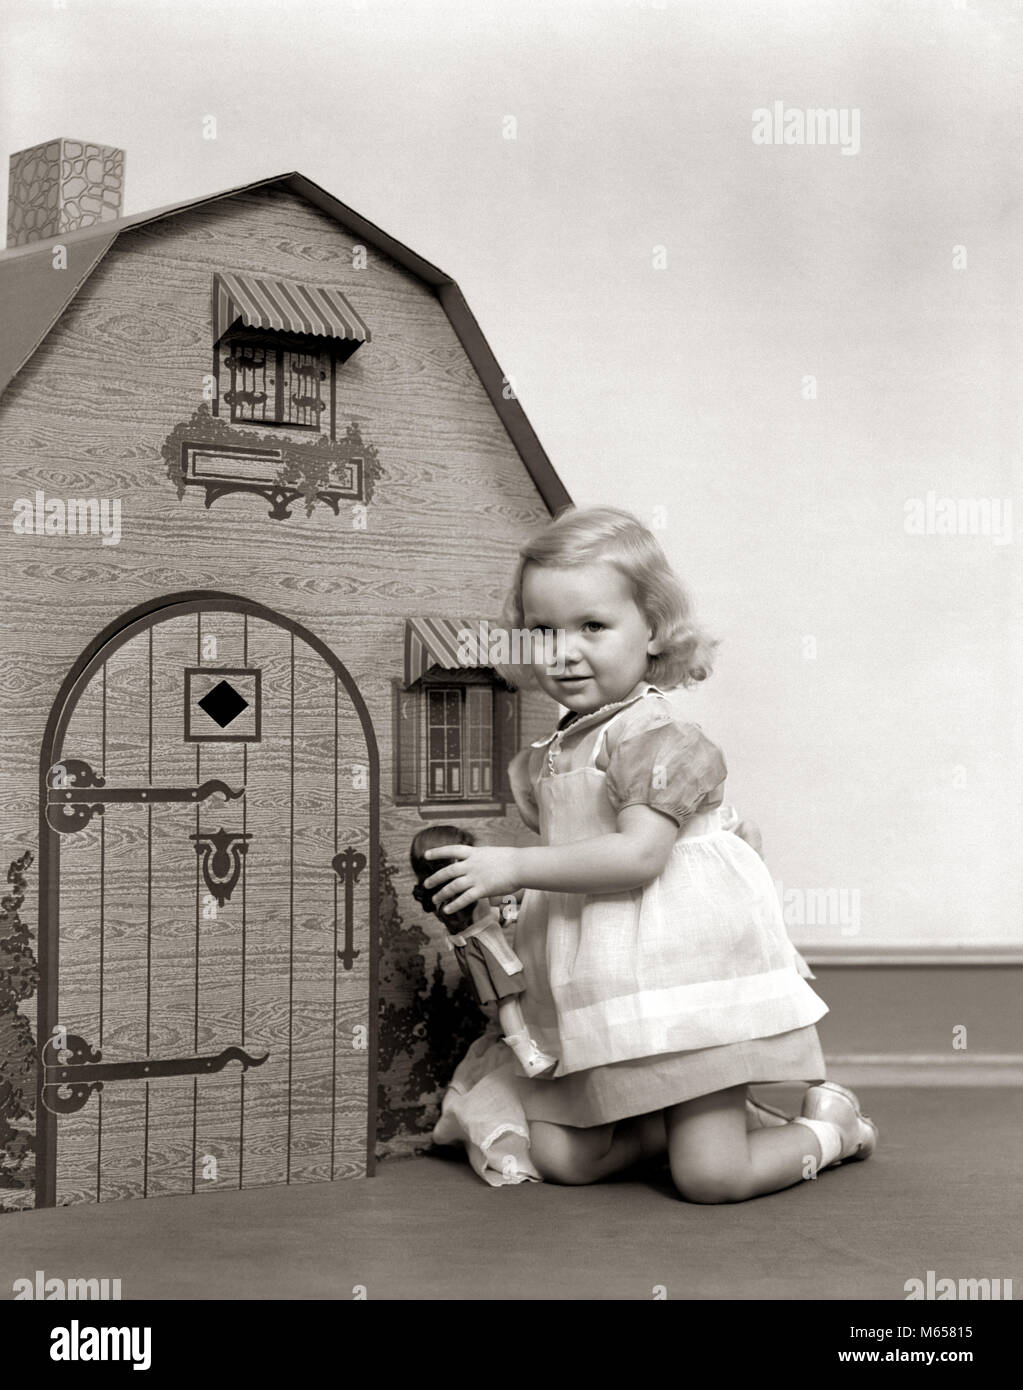 1940s LITTLE GIRL PLAYING DOLL DOLLHOUSE - j4017 HAR001 HARS ADVENTURE GROWTH IMAGINATION JUVENILES B&W BLACK AND WHITE CAUCASIAN ETHNICITY LOOKING AT CAMERA OLD FASHIONED PLAY HOUSE Stock Photo